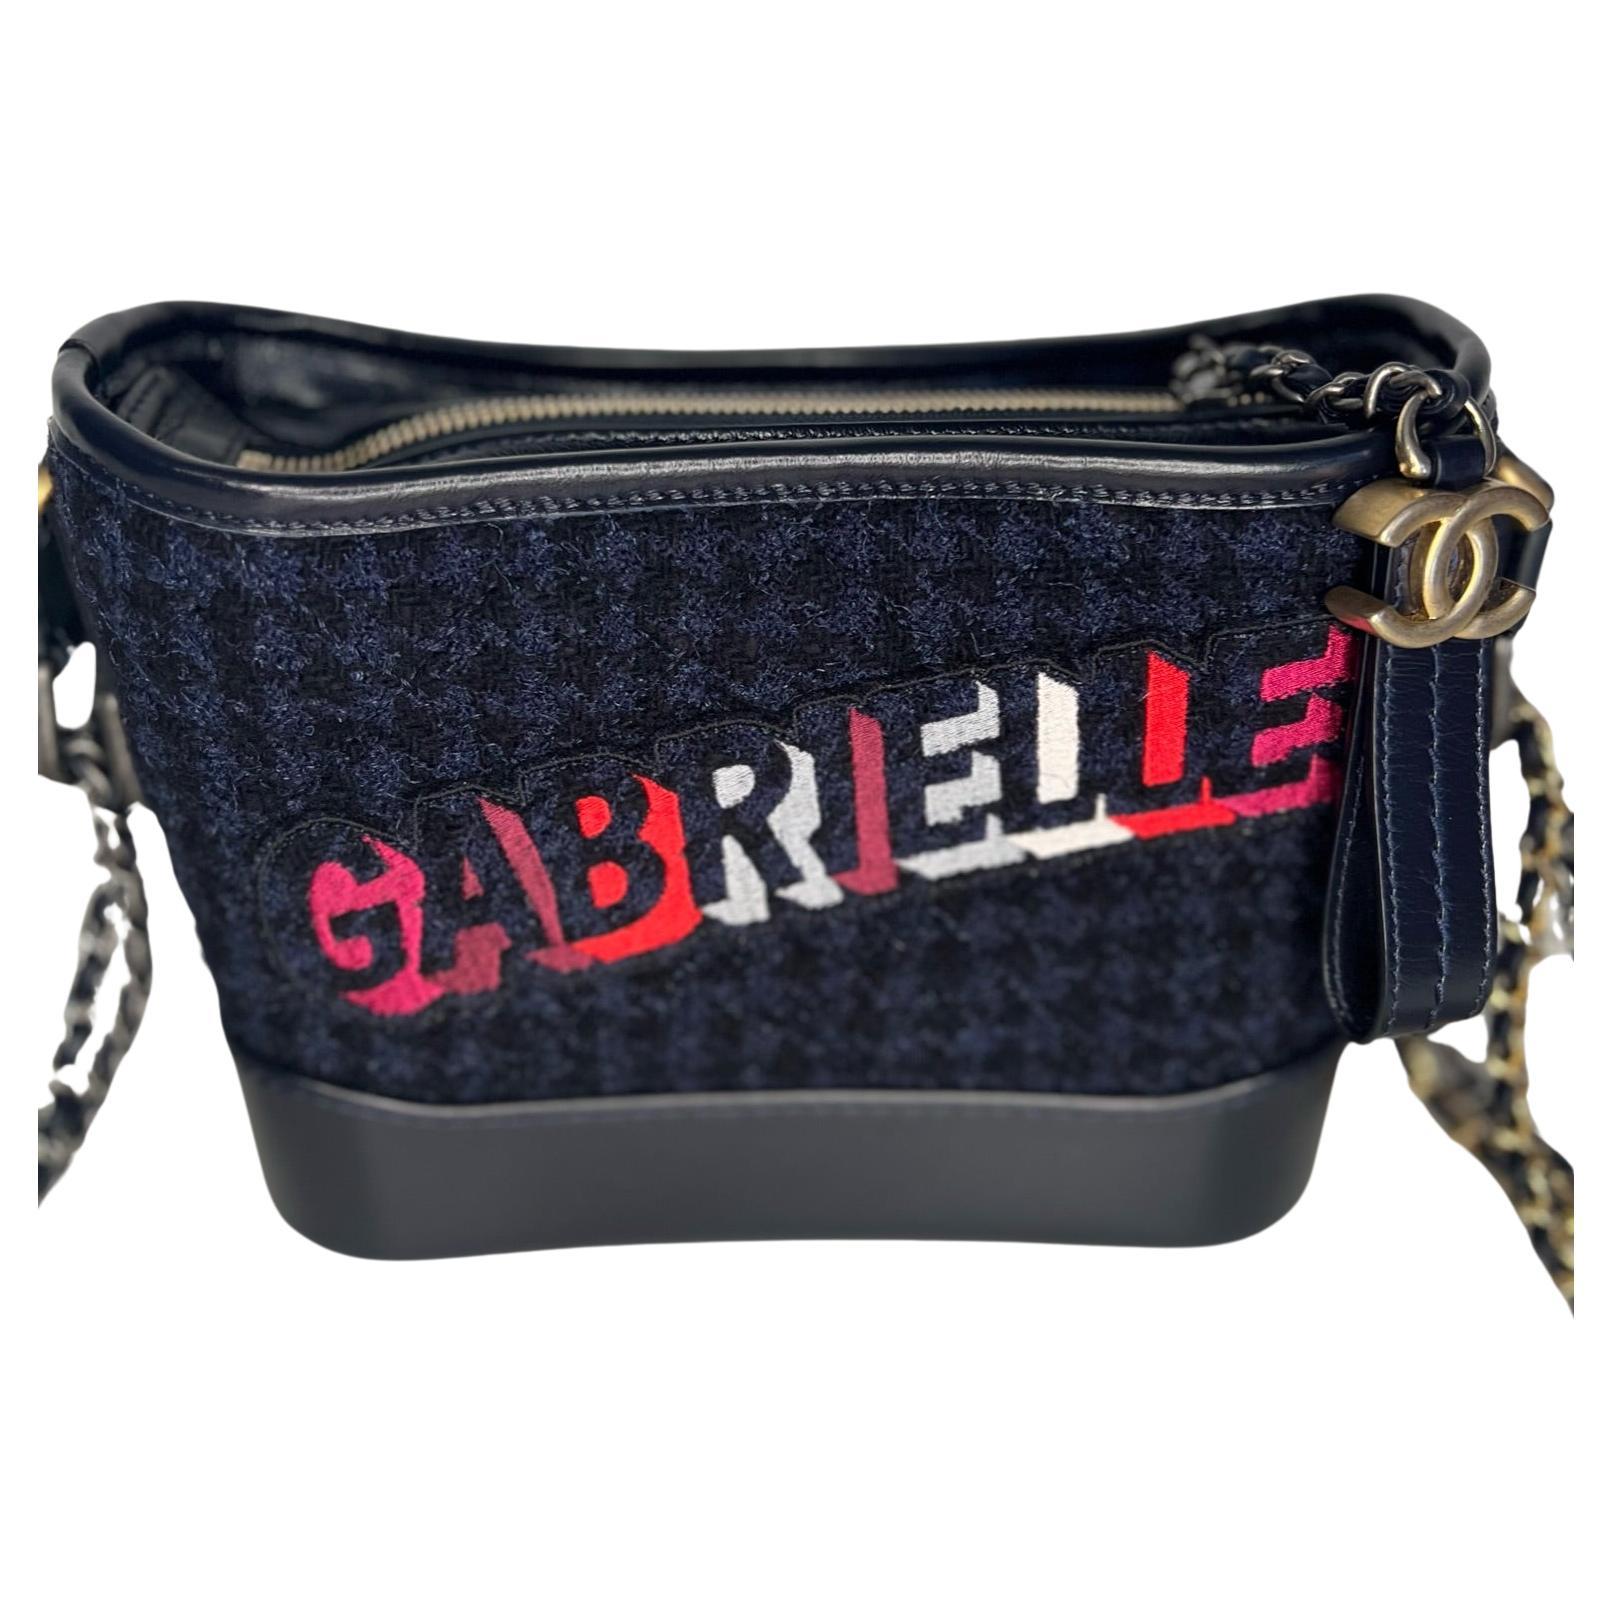 YOUR IT BAG GUIDE: THE GABRIELLE BAG